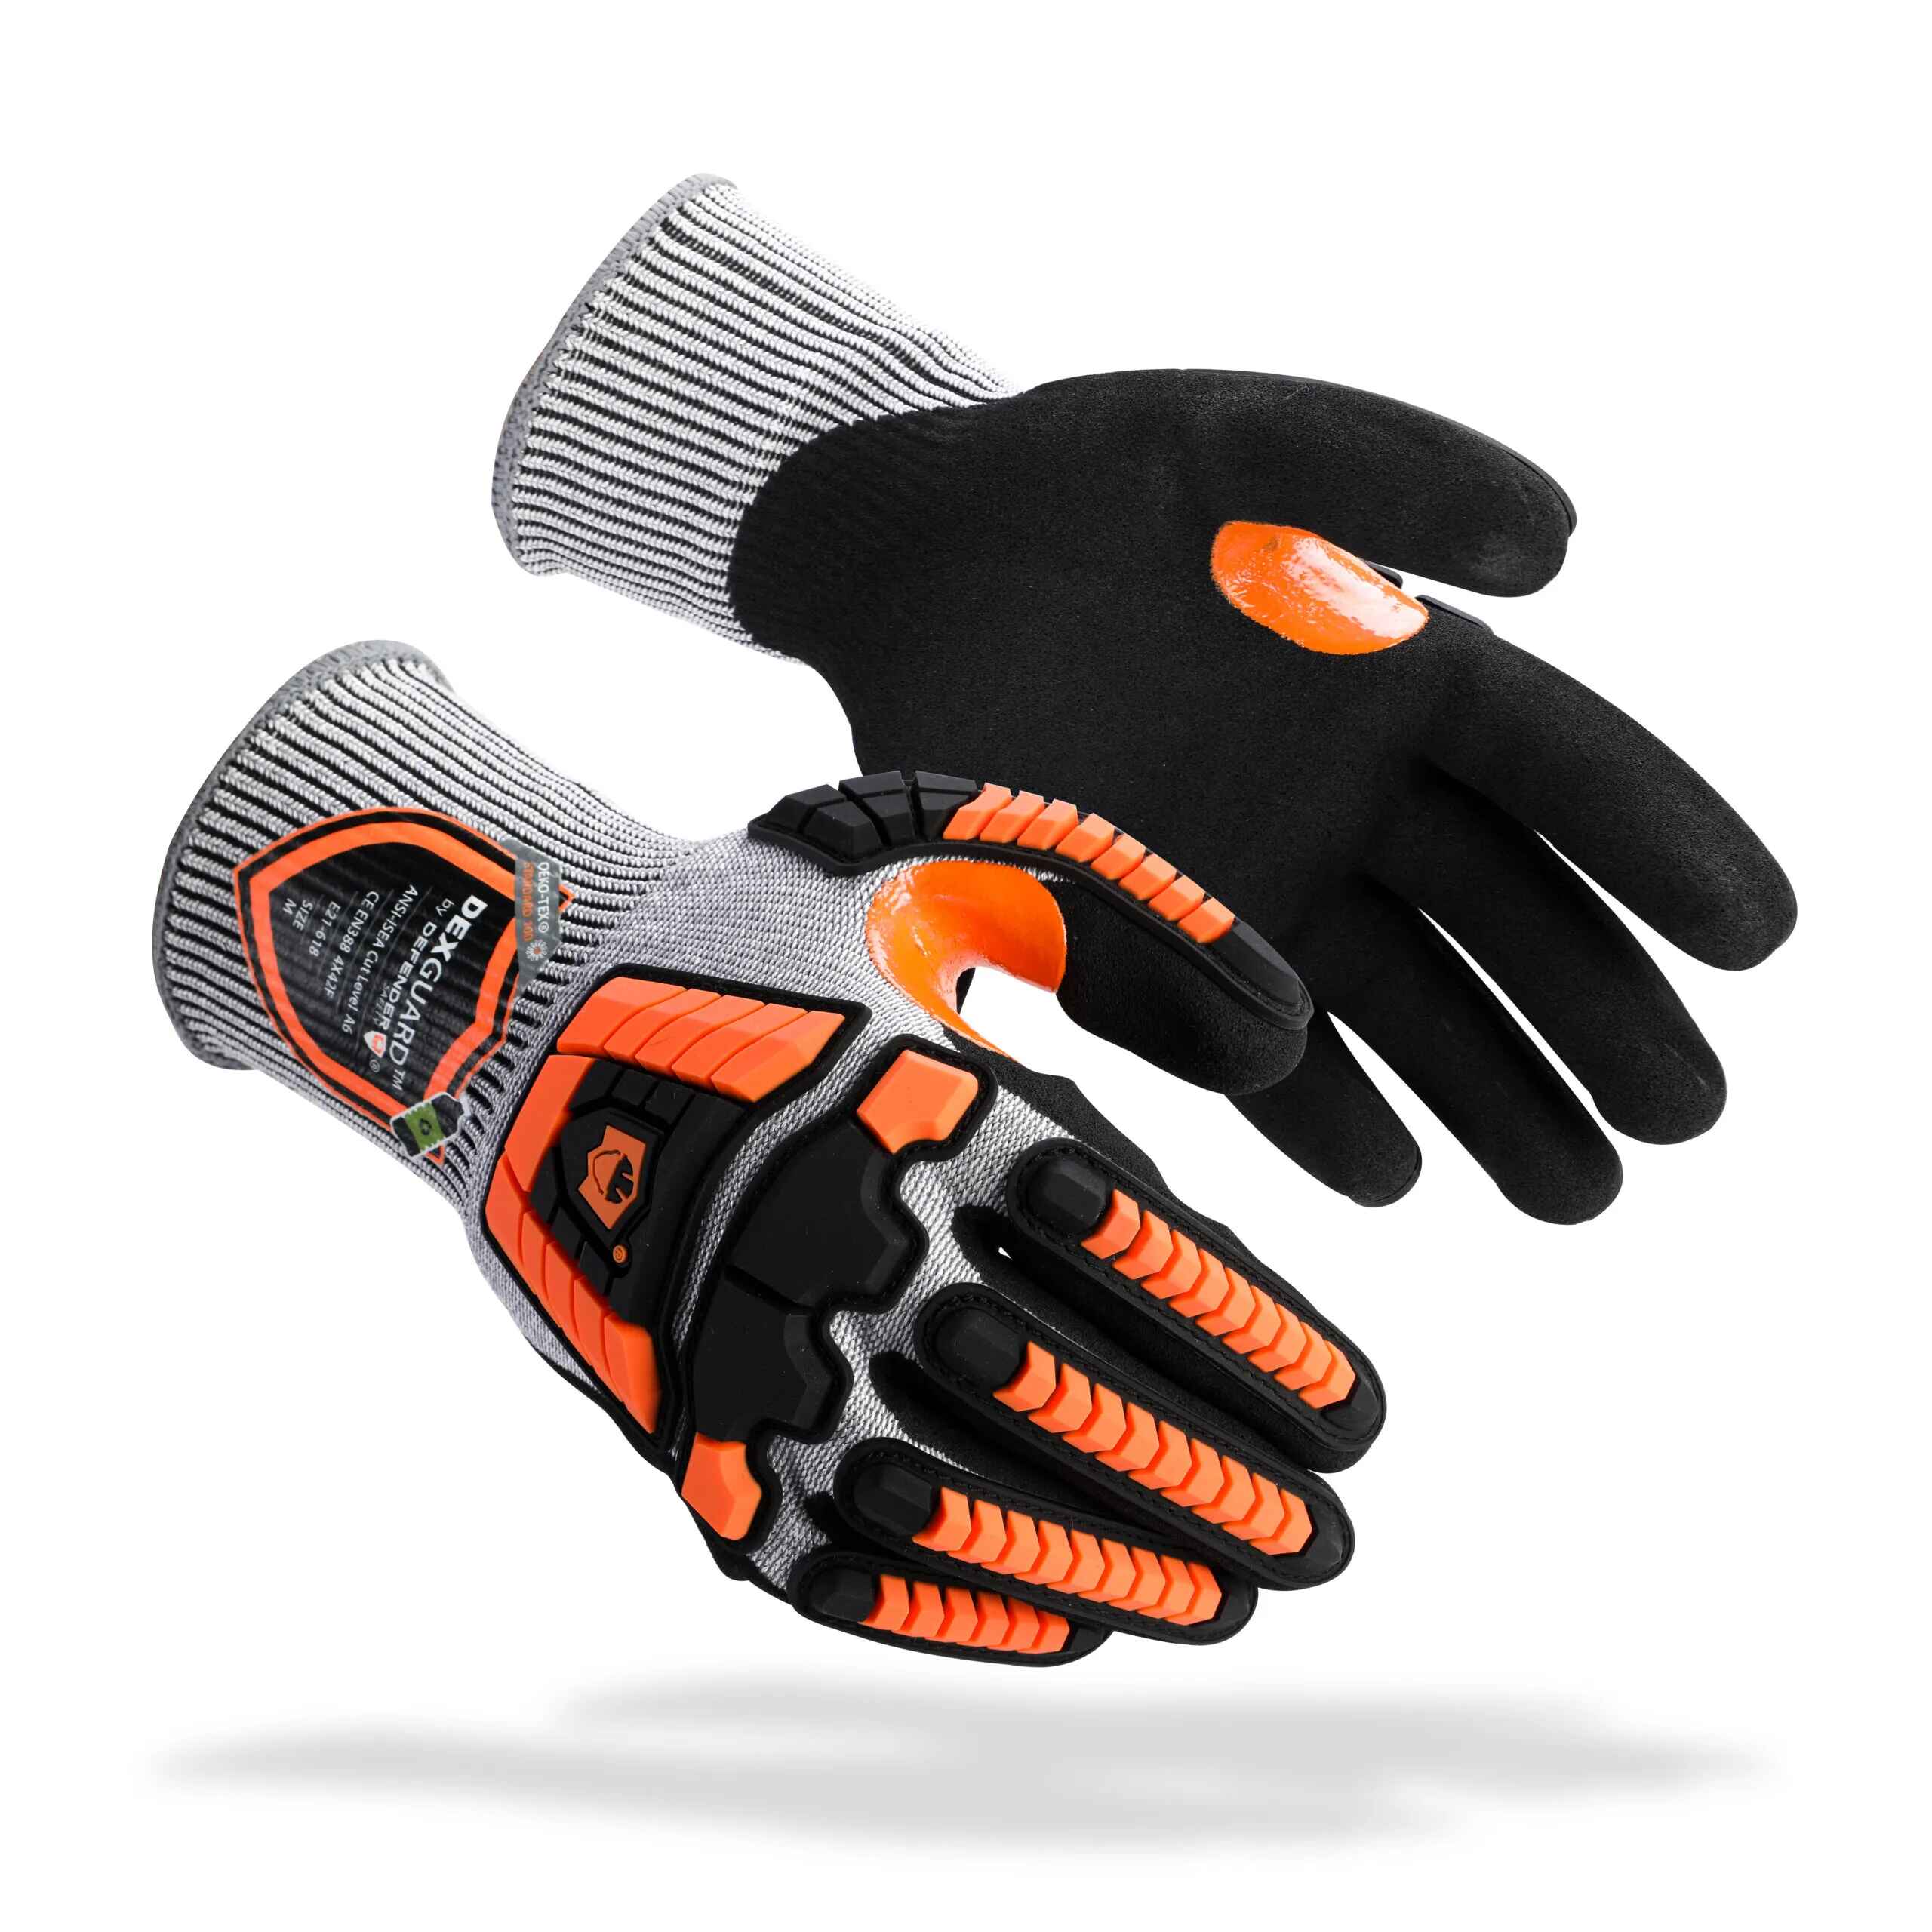 https://cdn.shopify.com/s/files/1/0786/4523/1934/products/dexguard-a6-cut-gloves-back-of-the-hand-impact-resistant-level-4-abrasion-resistant-textured-nitrile-coating-679554.jpg?v=1690825176&width=2560